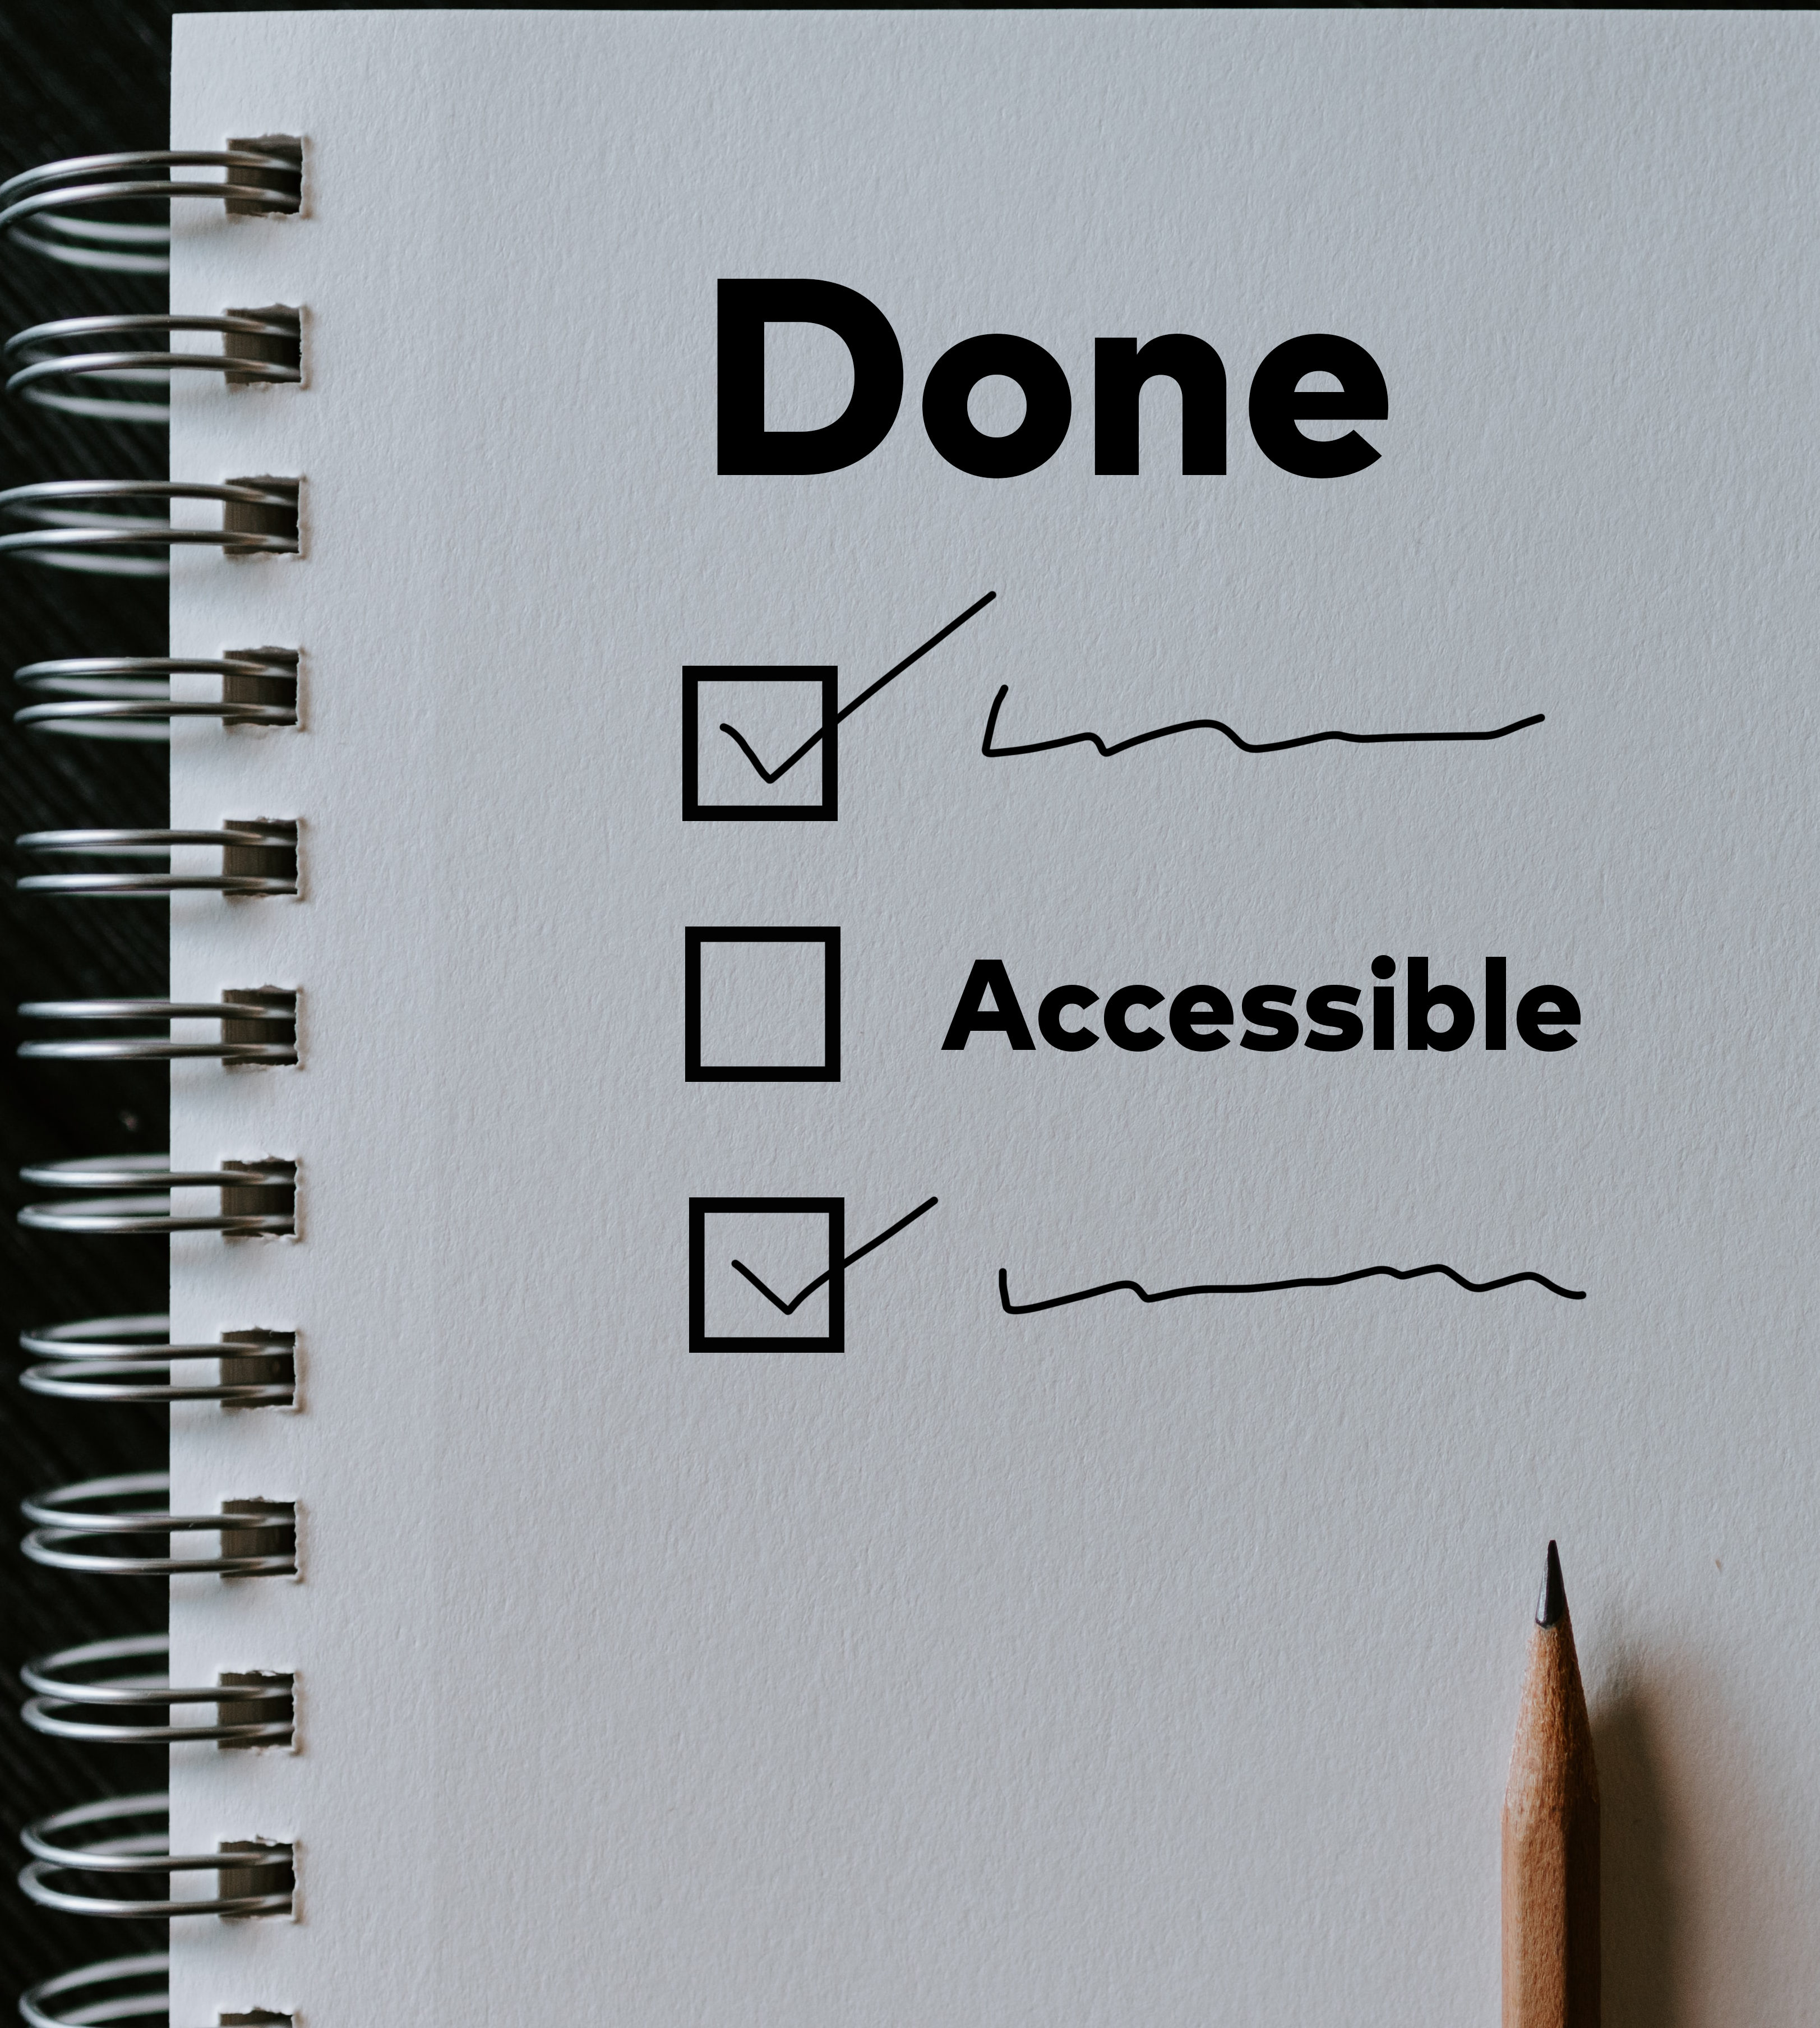 Image of notepad with "Done" checklist that includes accessibility